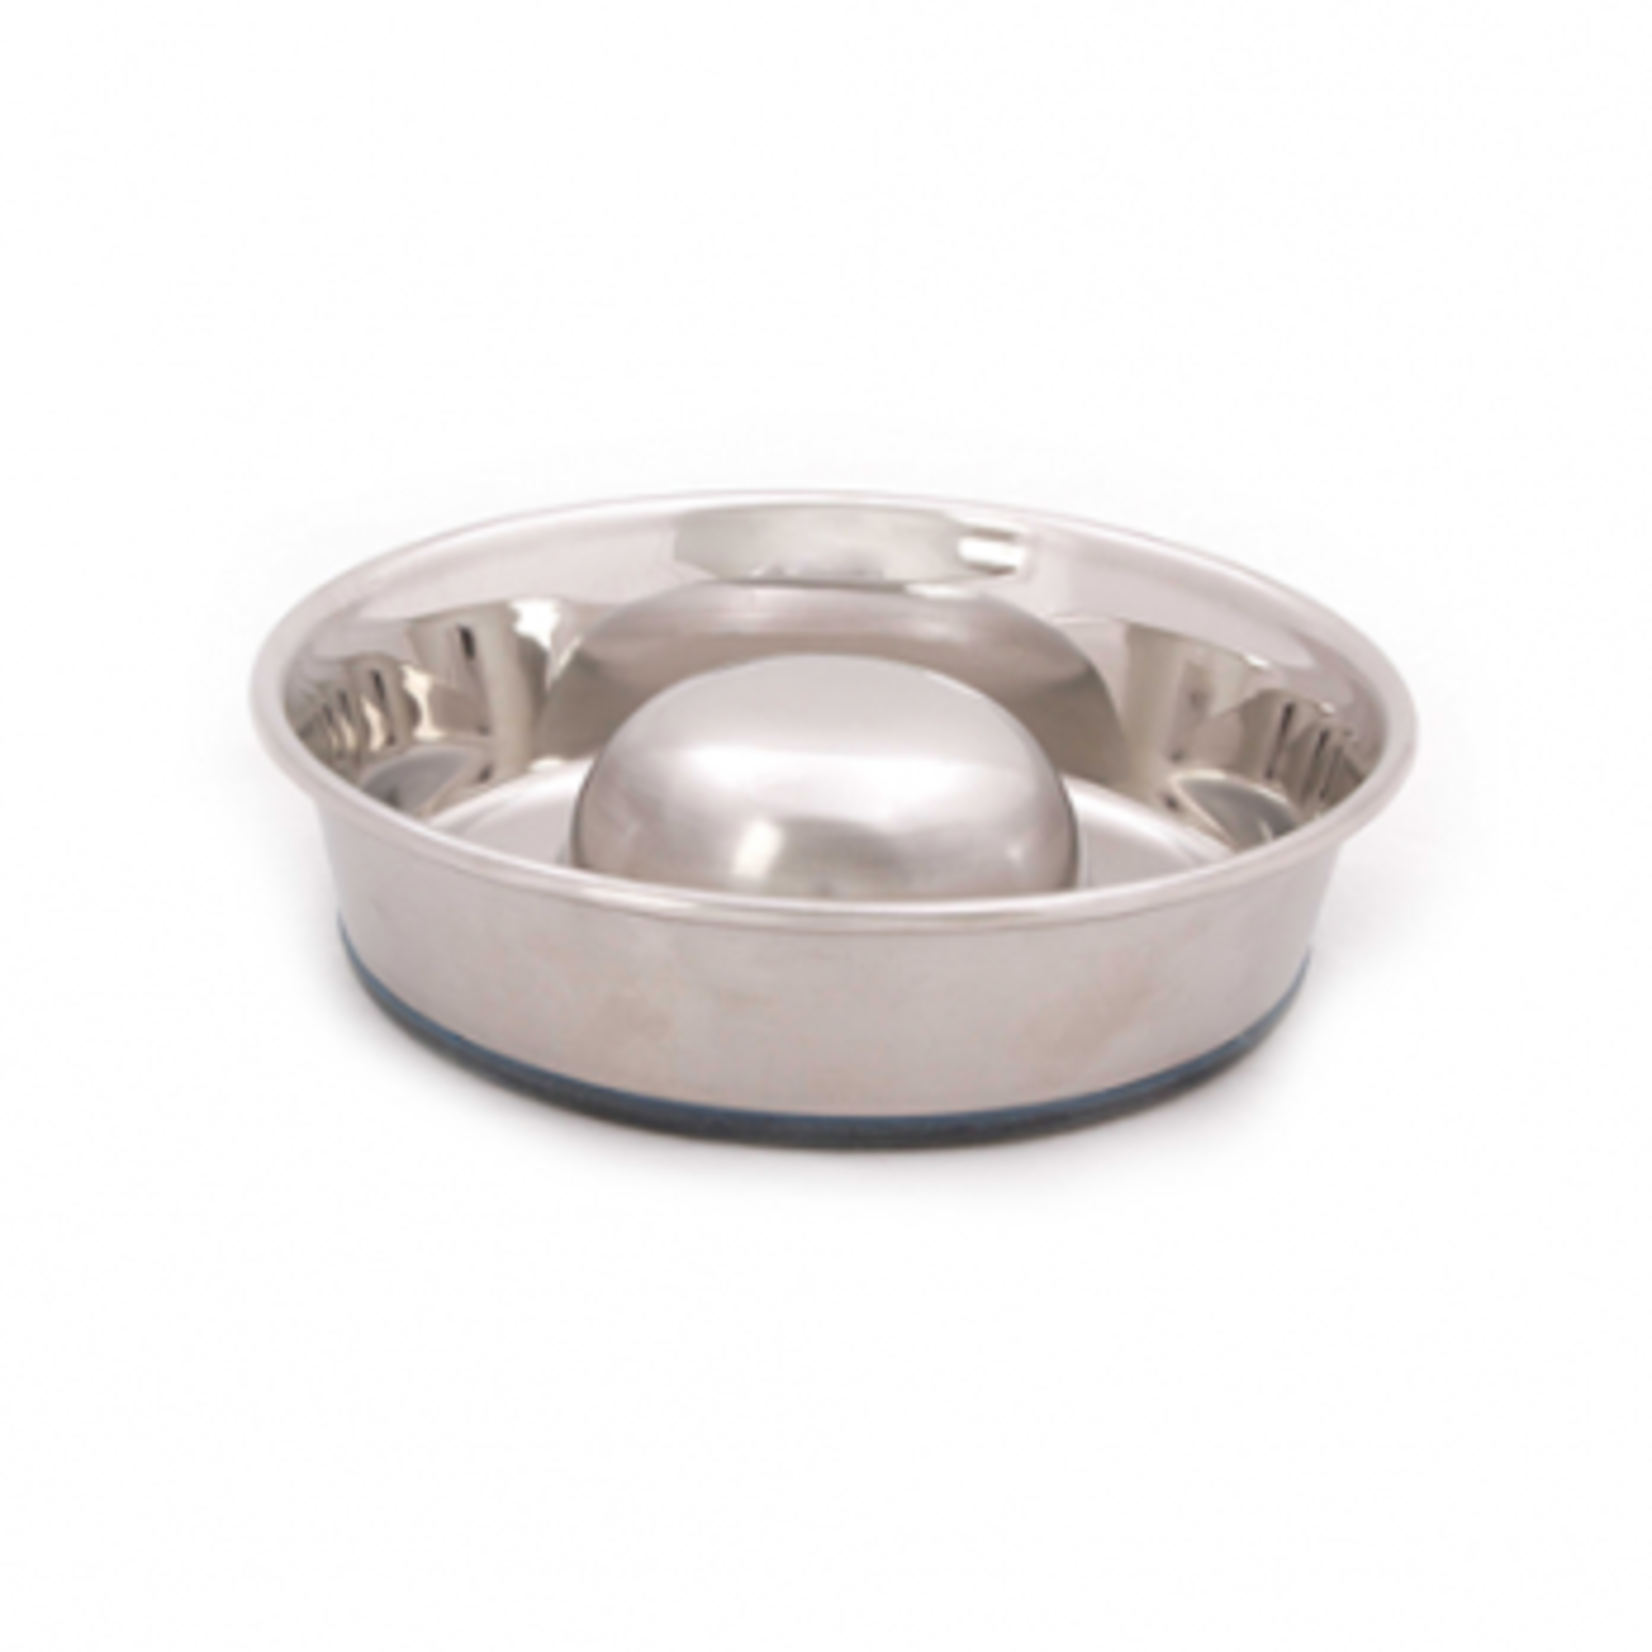 OurPets Stainless Steel with Rubber - Slow Feed Bowl - Small